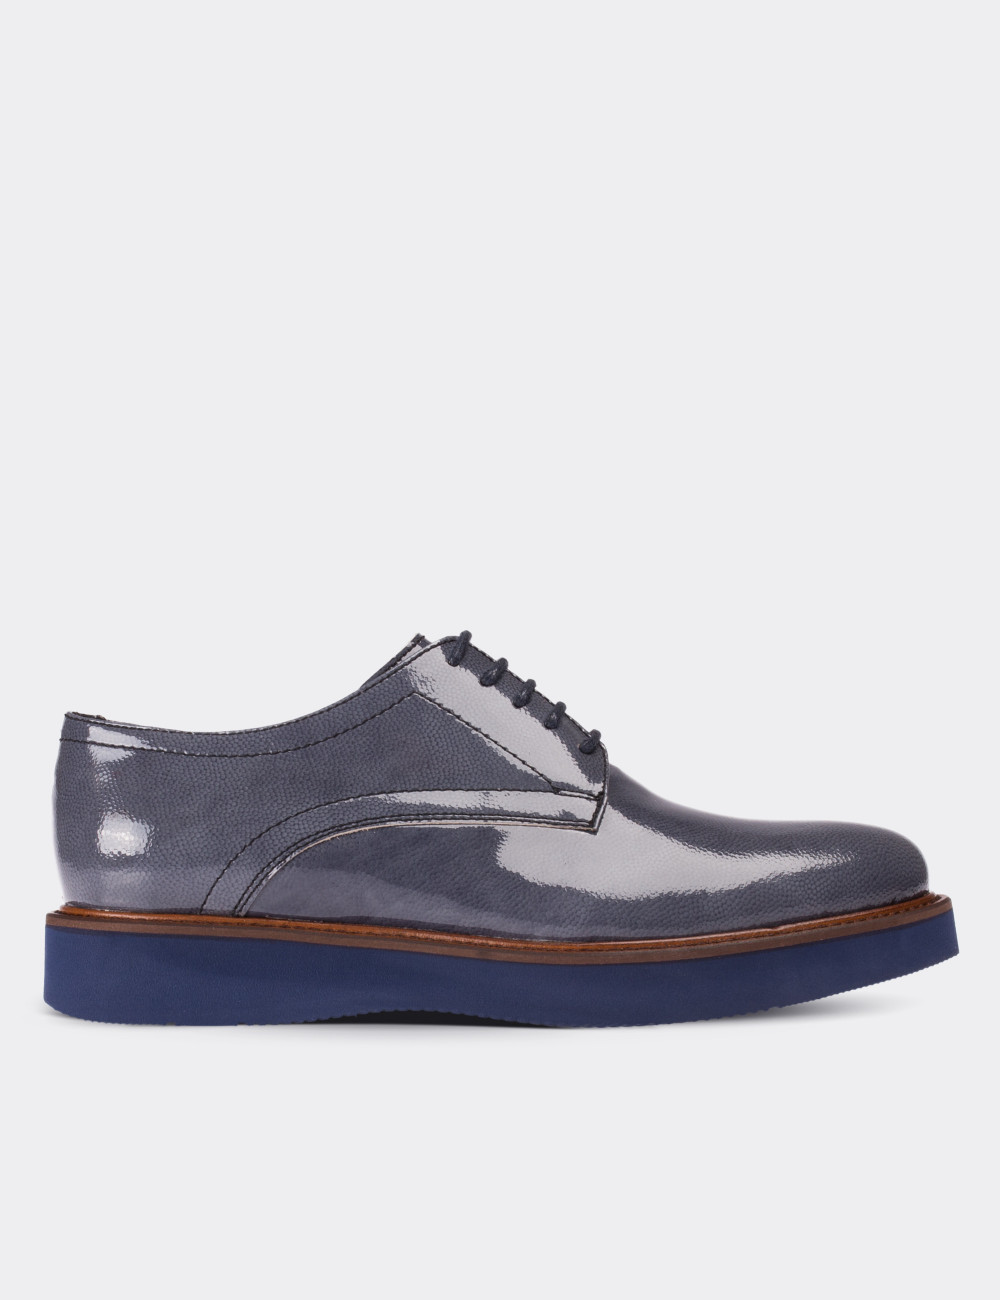 patent leather lace up shoes